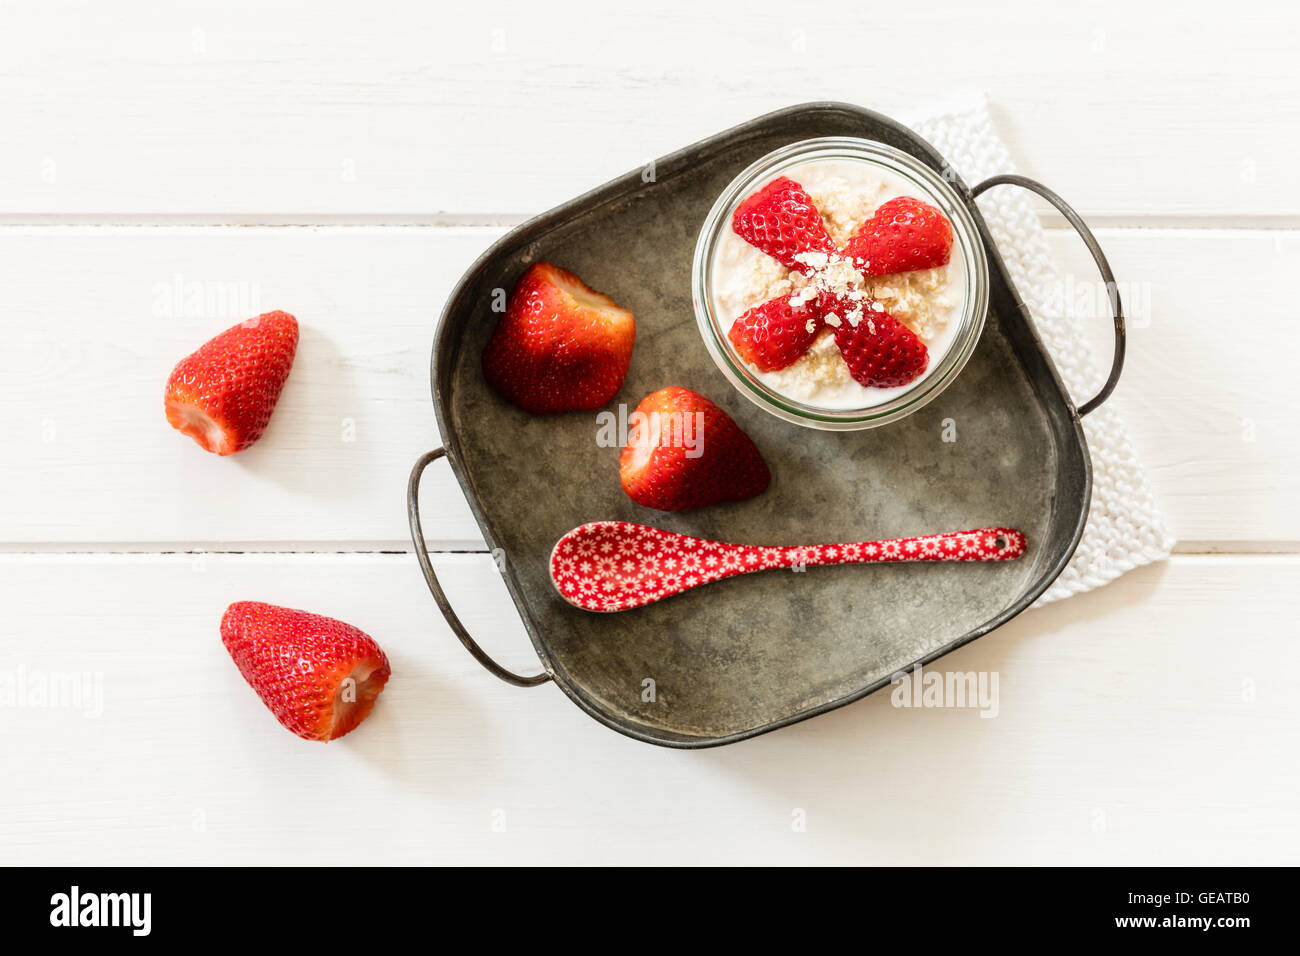 Glass of overnight oats with strawberries on metal tray Stock Photo